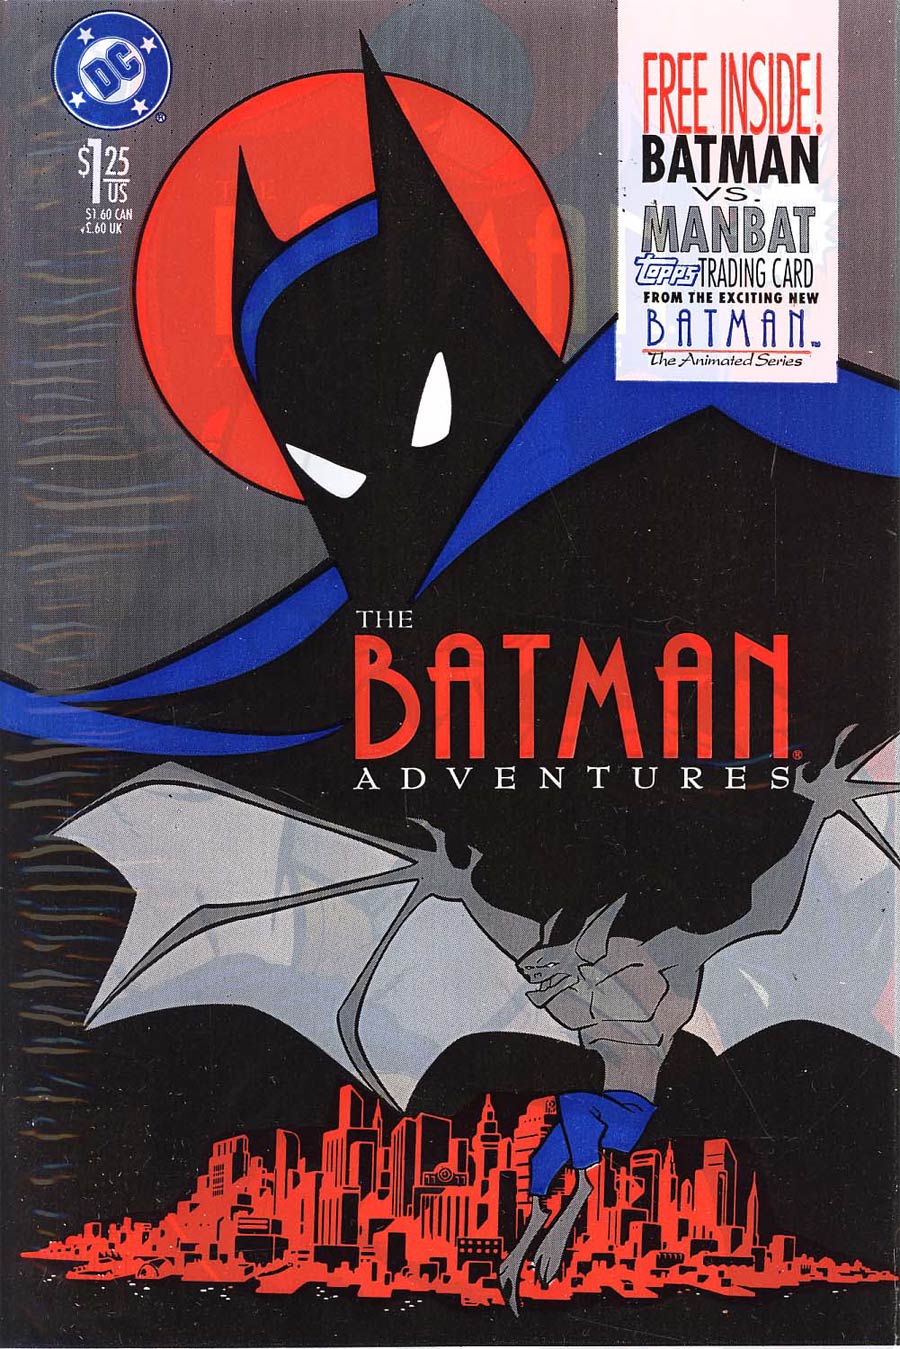 Batman Adventures #7 Cover A With Polybag